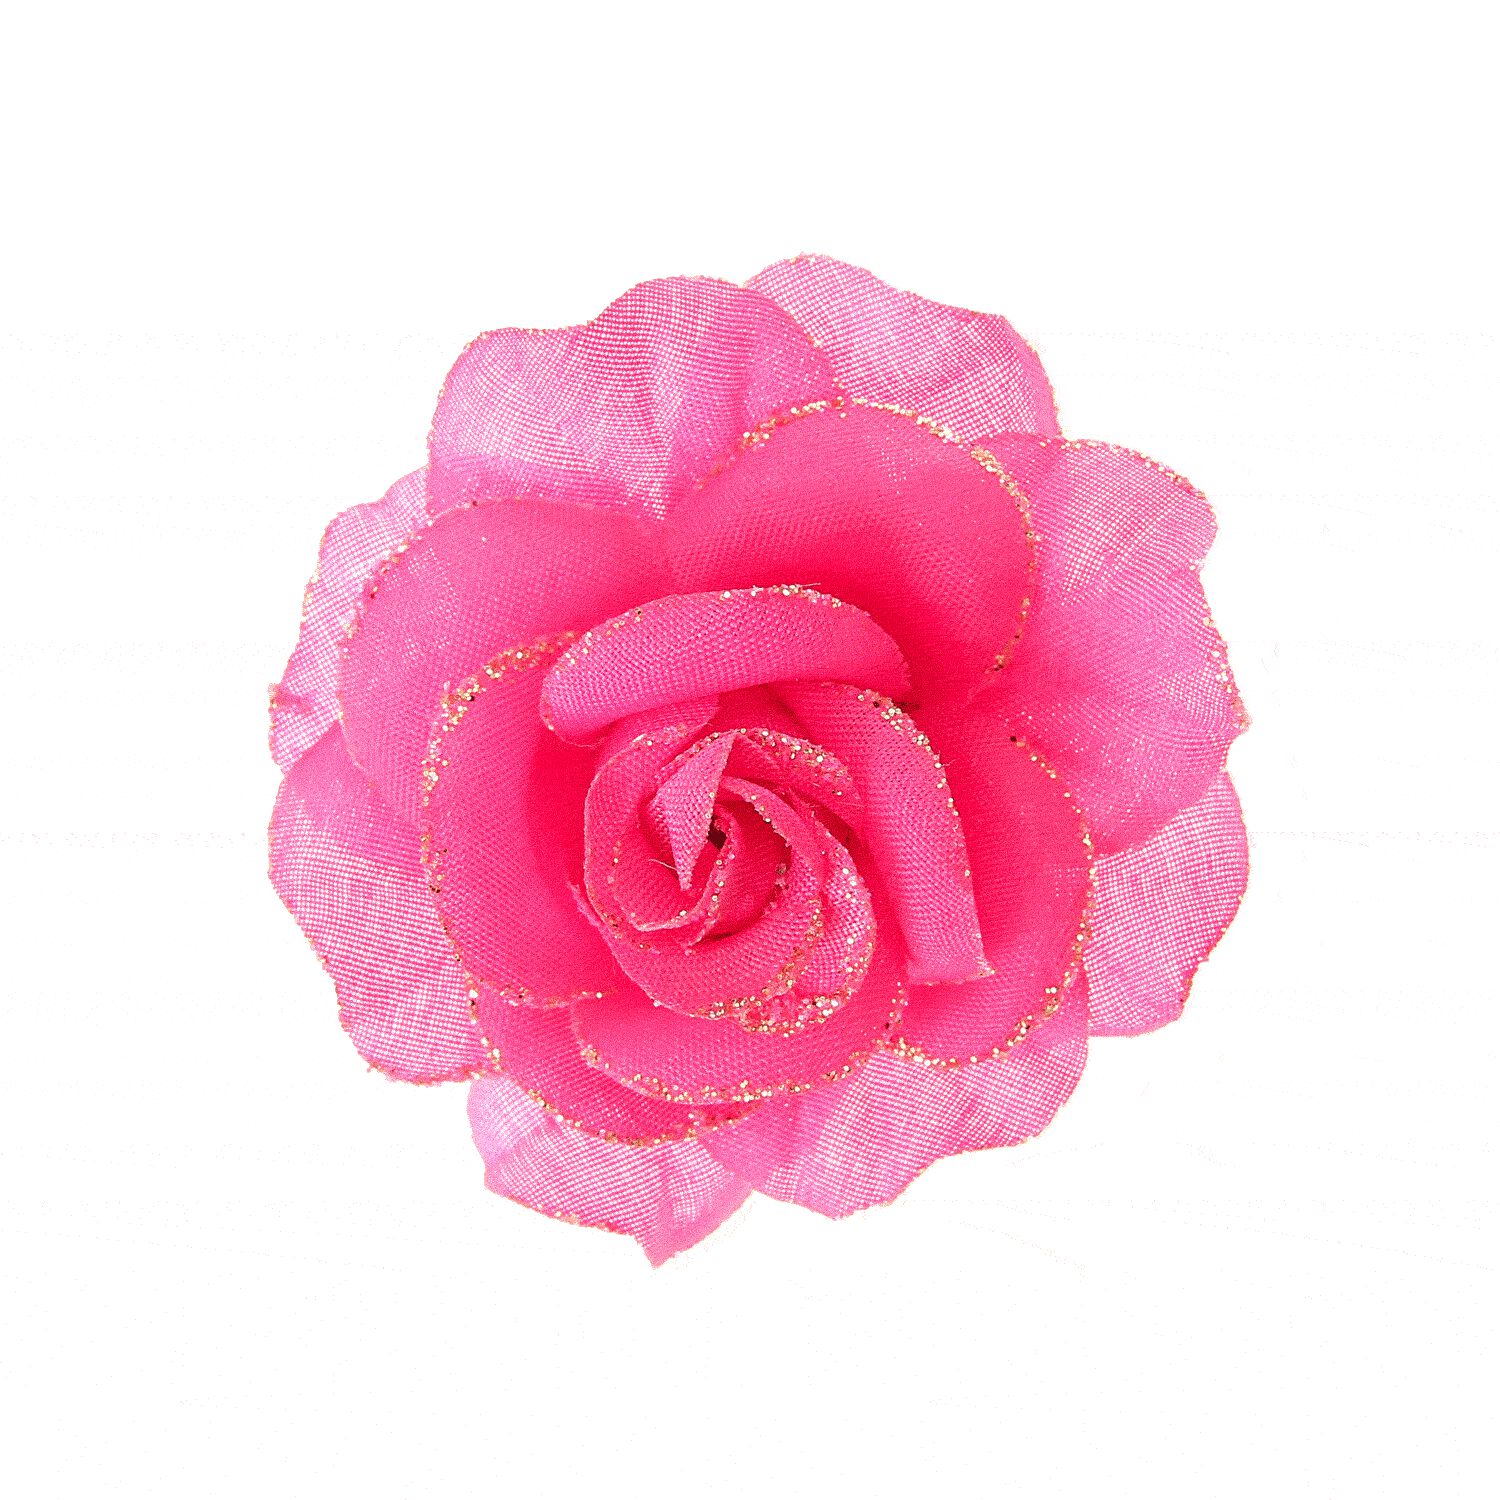 Claire's Claires Accessories Official Head Hair Clip Spotty Pink Flower £3 RRP 